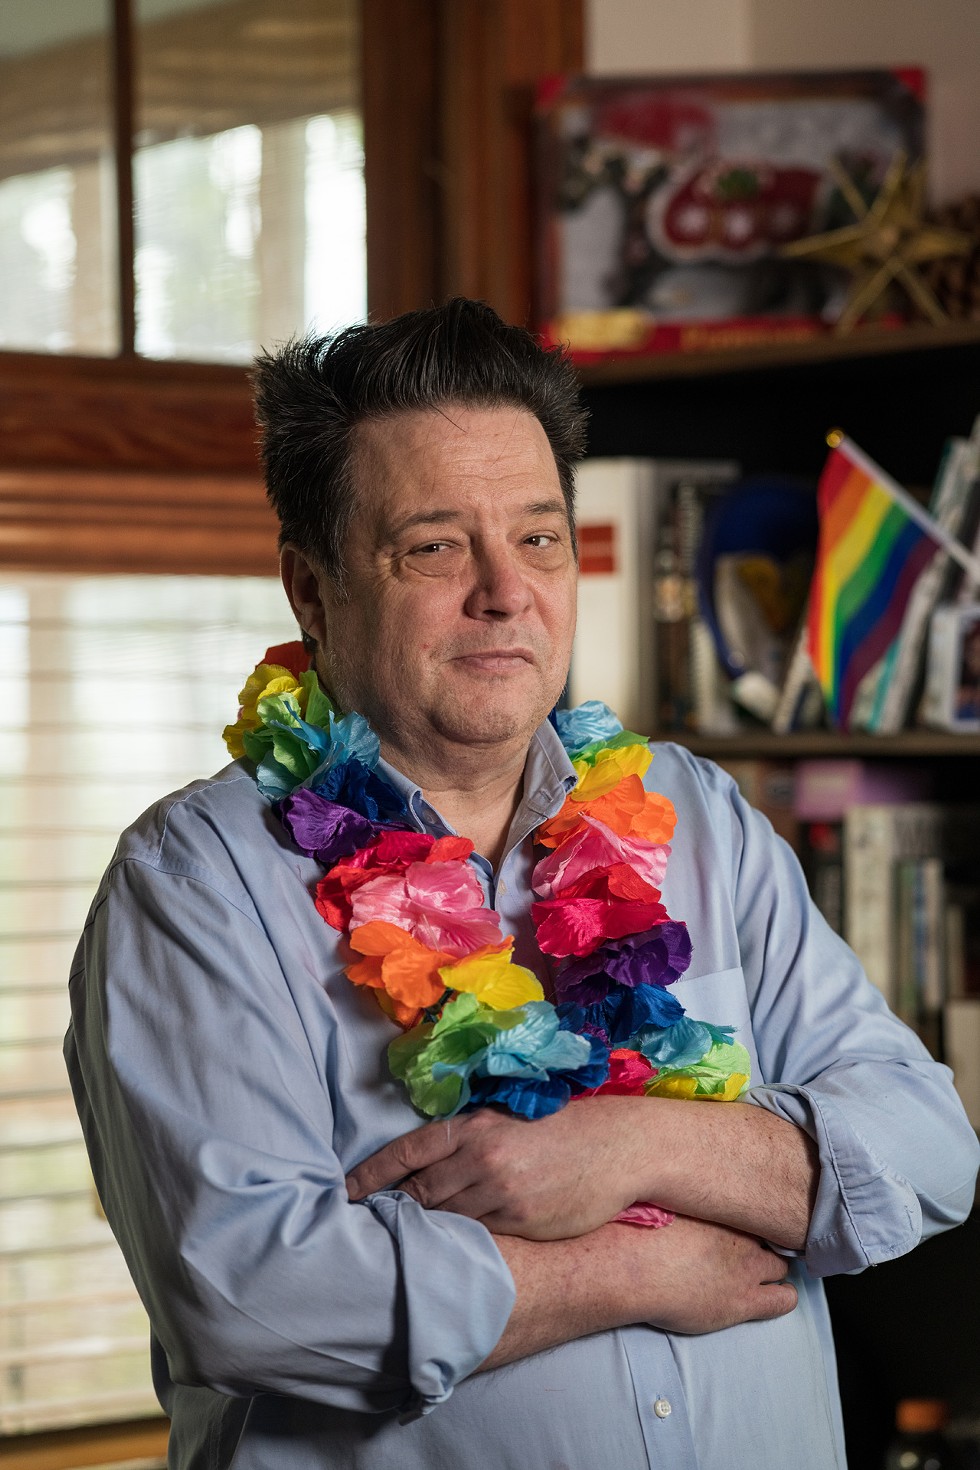 Michael Jepson attended the first Spokane Pride event in 1992 when he was 26. - ERICK DOXEY PHOTO